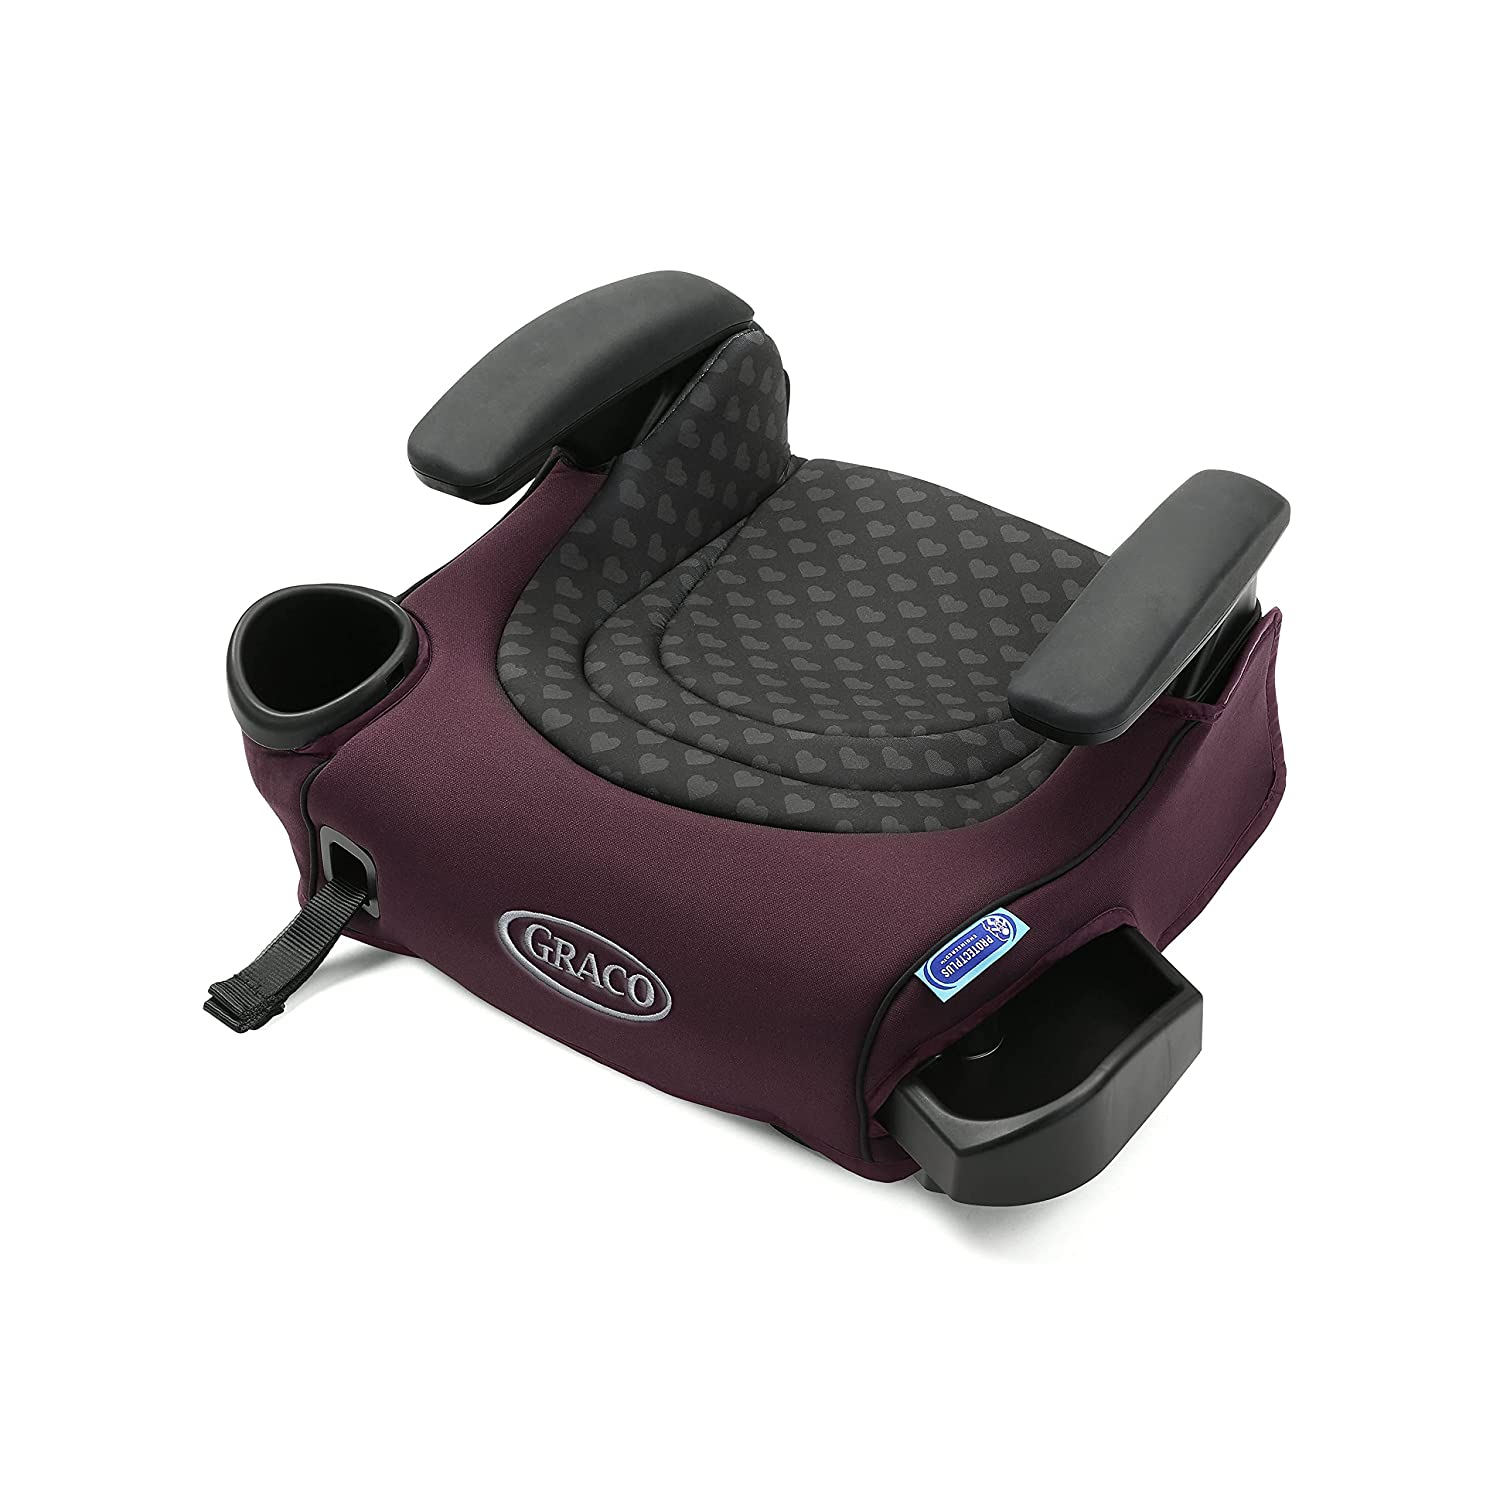 Graco TurboBooster LX Backless Booster with Affix Latch (Kass) $28.69